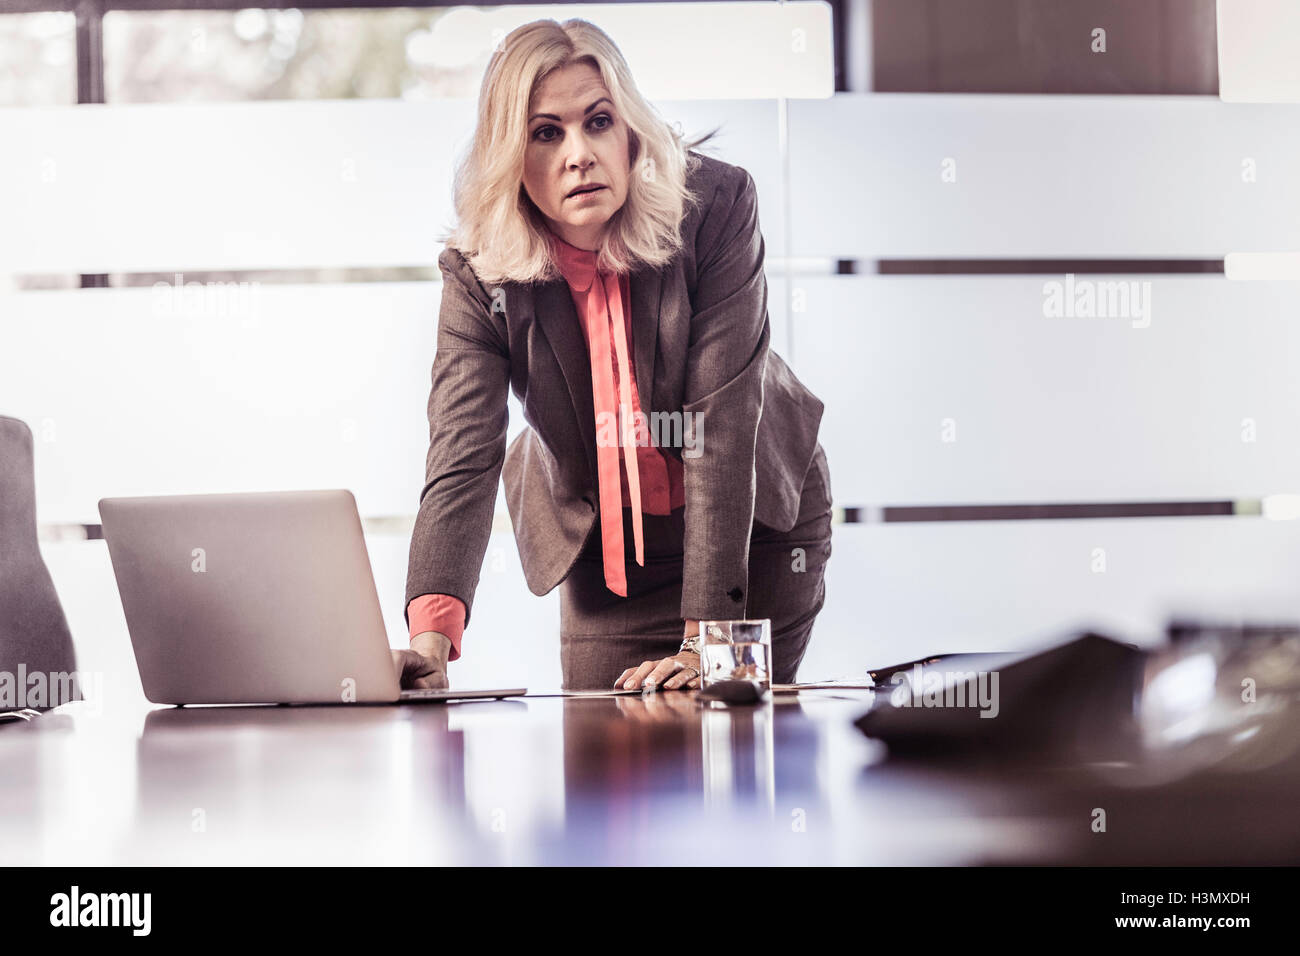 Determined businesswoman leaning forward on boardroom table Stock Photo